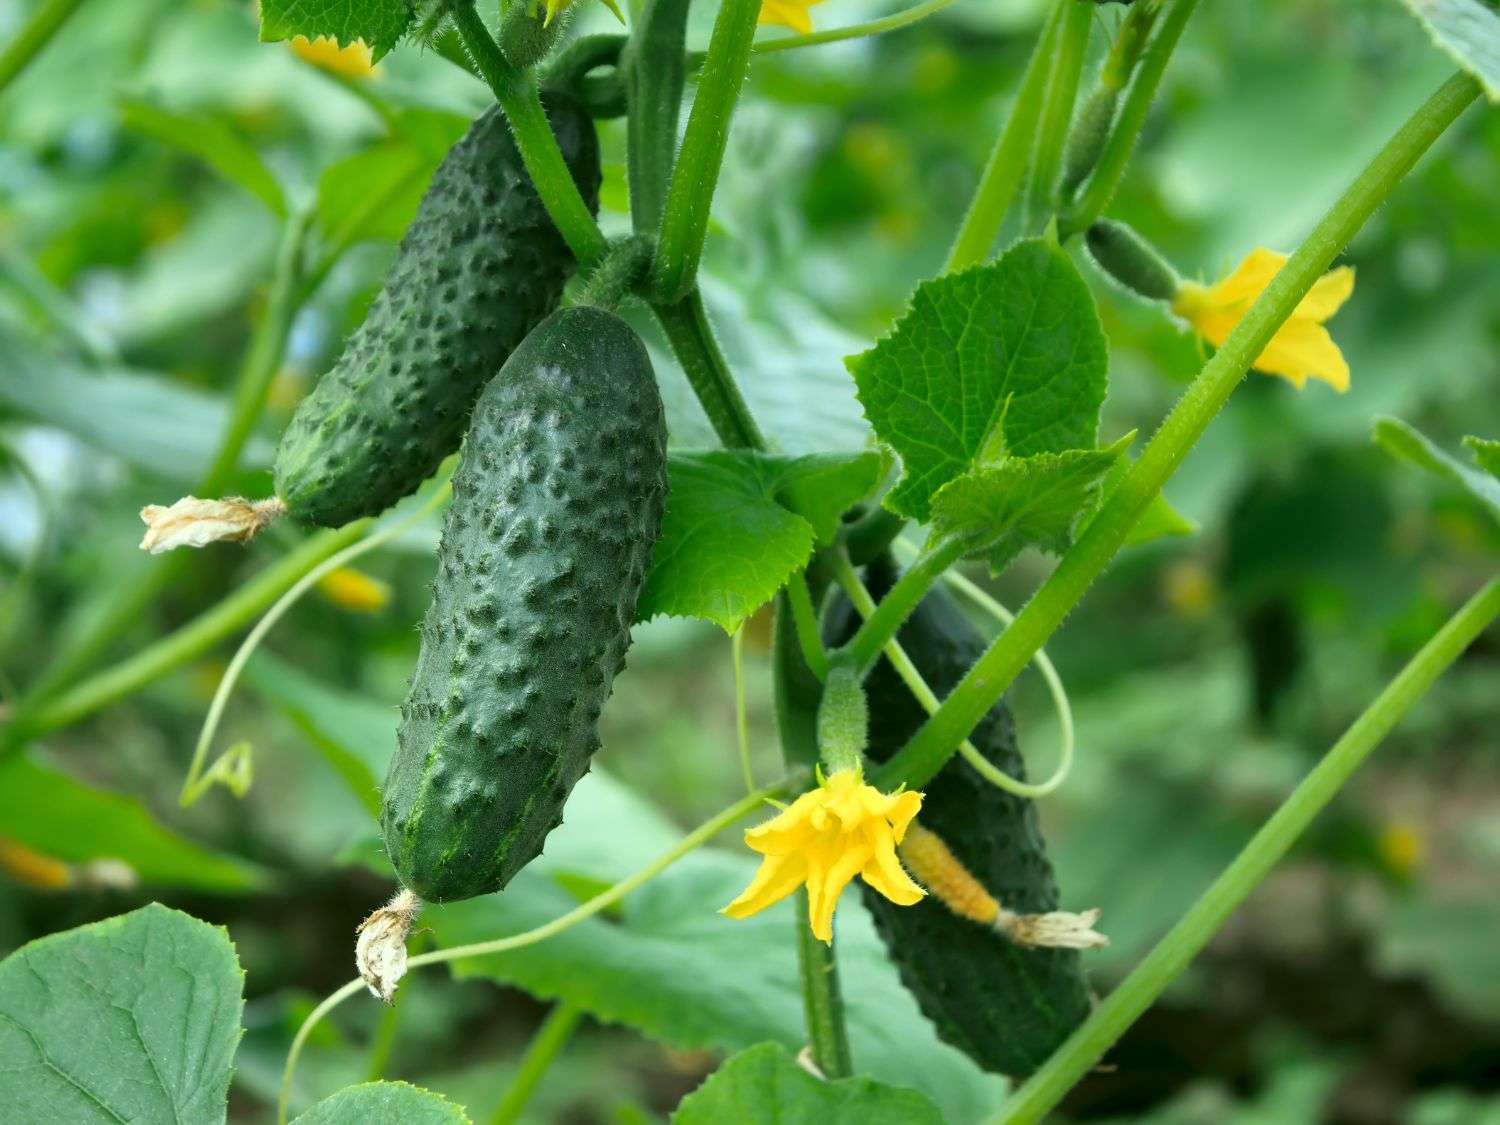 A close up photo of cucumbers growing in the garden